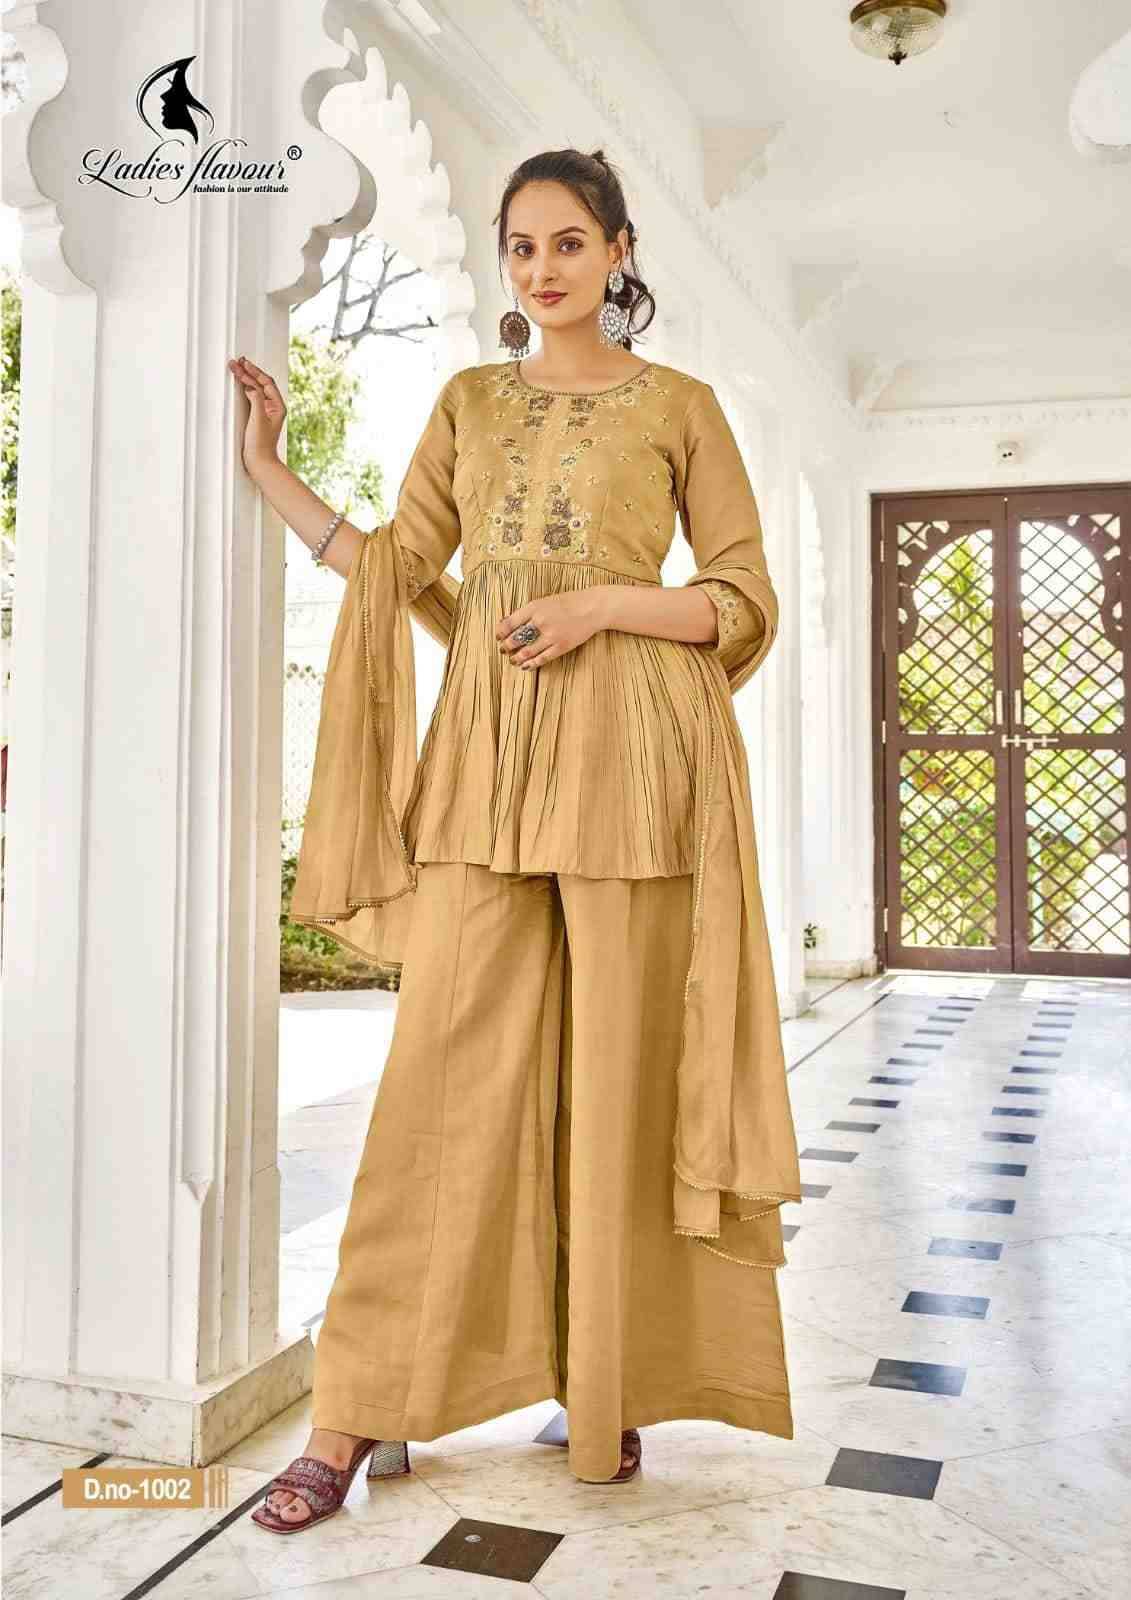 Aarzoo By Ladies Flavour 1001 To 1004 Series Beautiful Stylish Suits Fancy Colorful Casual Wear & Ethnic Wear & Ready To Wear Heavy Chanderi Silk Dresses At Wholesale Price